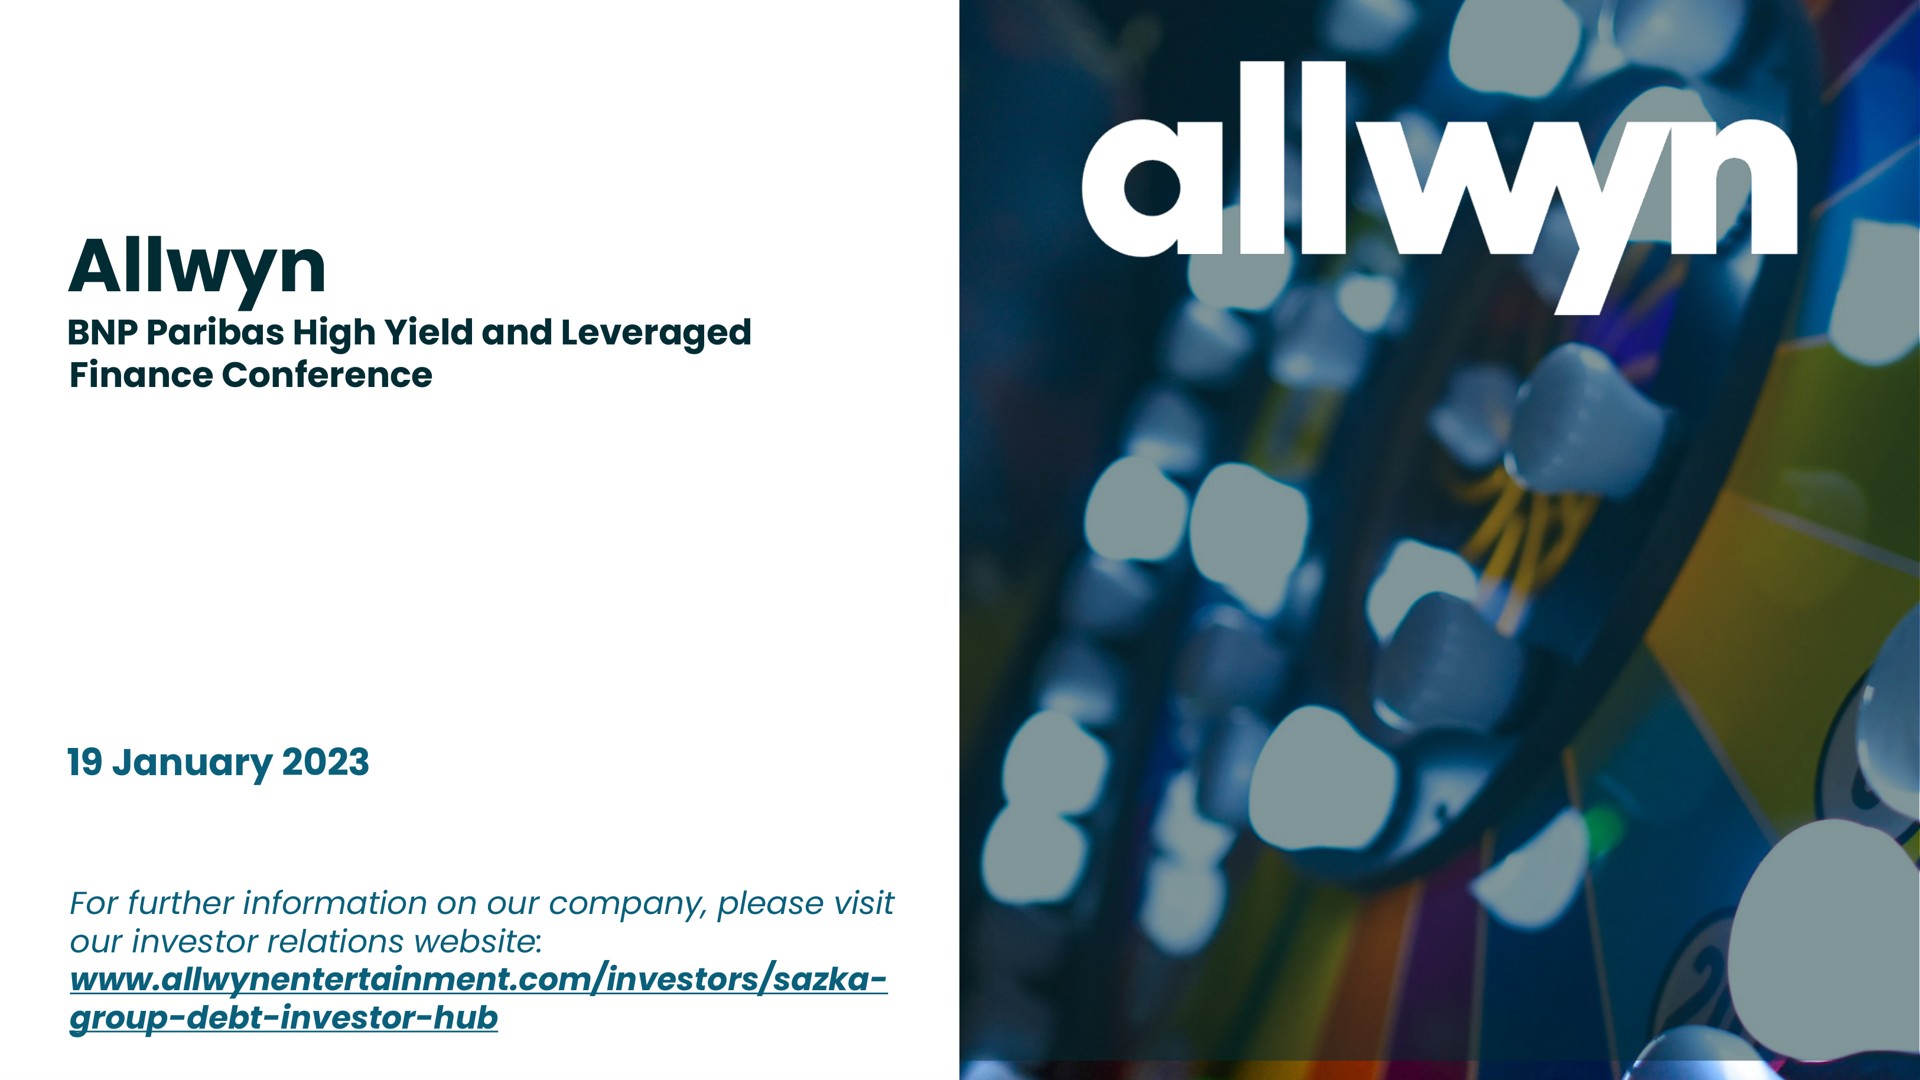 high yield and leveraged finance conference for further information on our company please visit our investor relations investors group debt investor hub | Allwyn